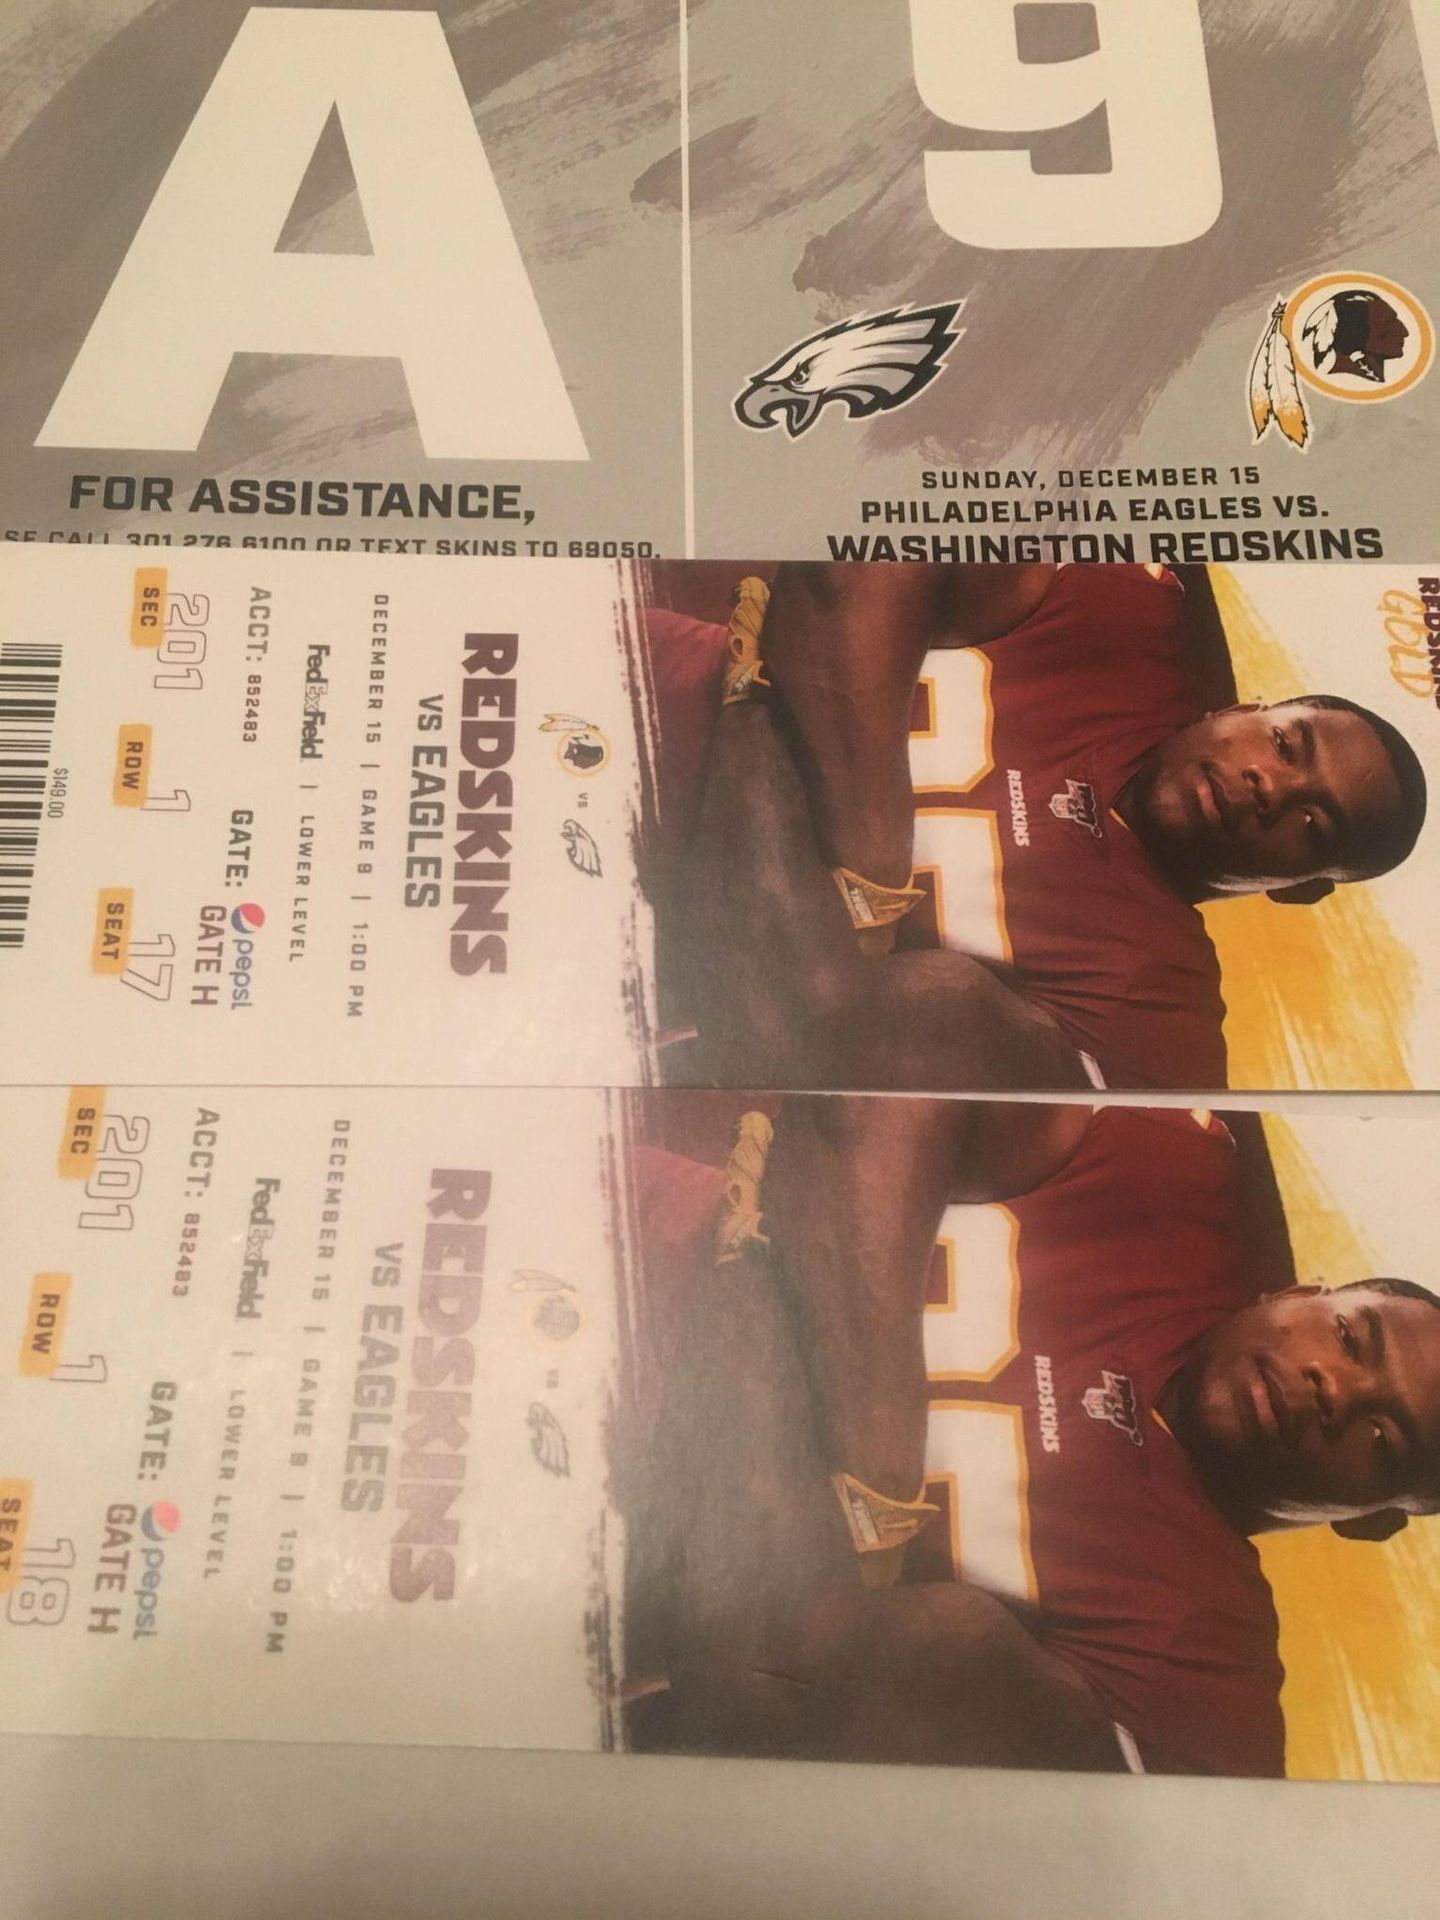 REDSKINS TICKETS (Parking Ticket Also Included)